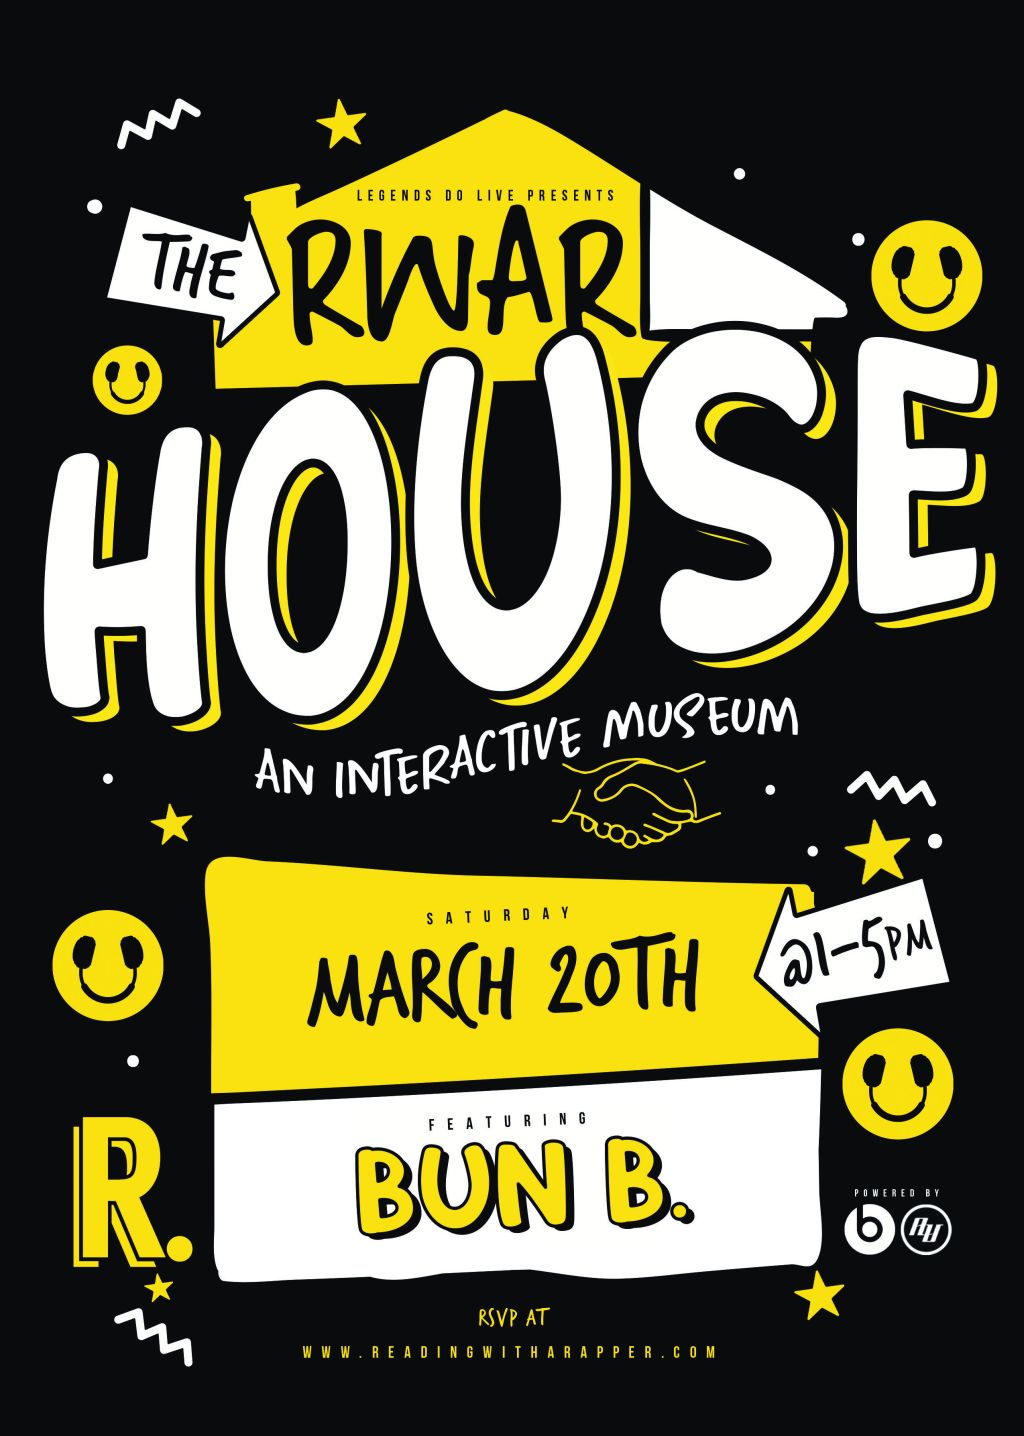 Reading With A Rapper RWAR House Interactive Museum